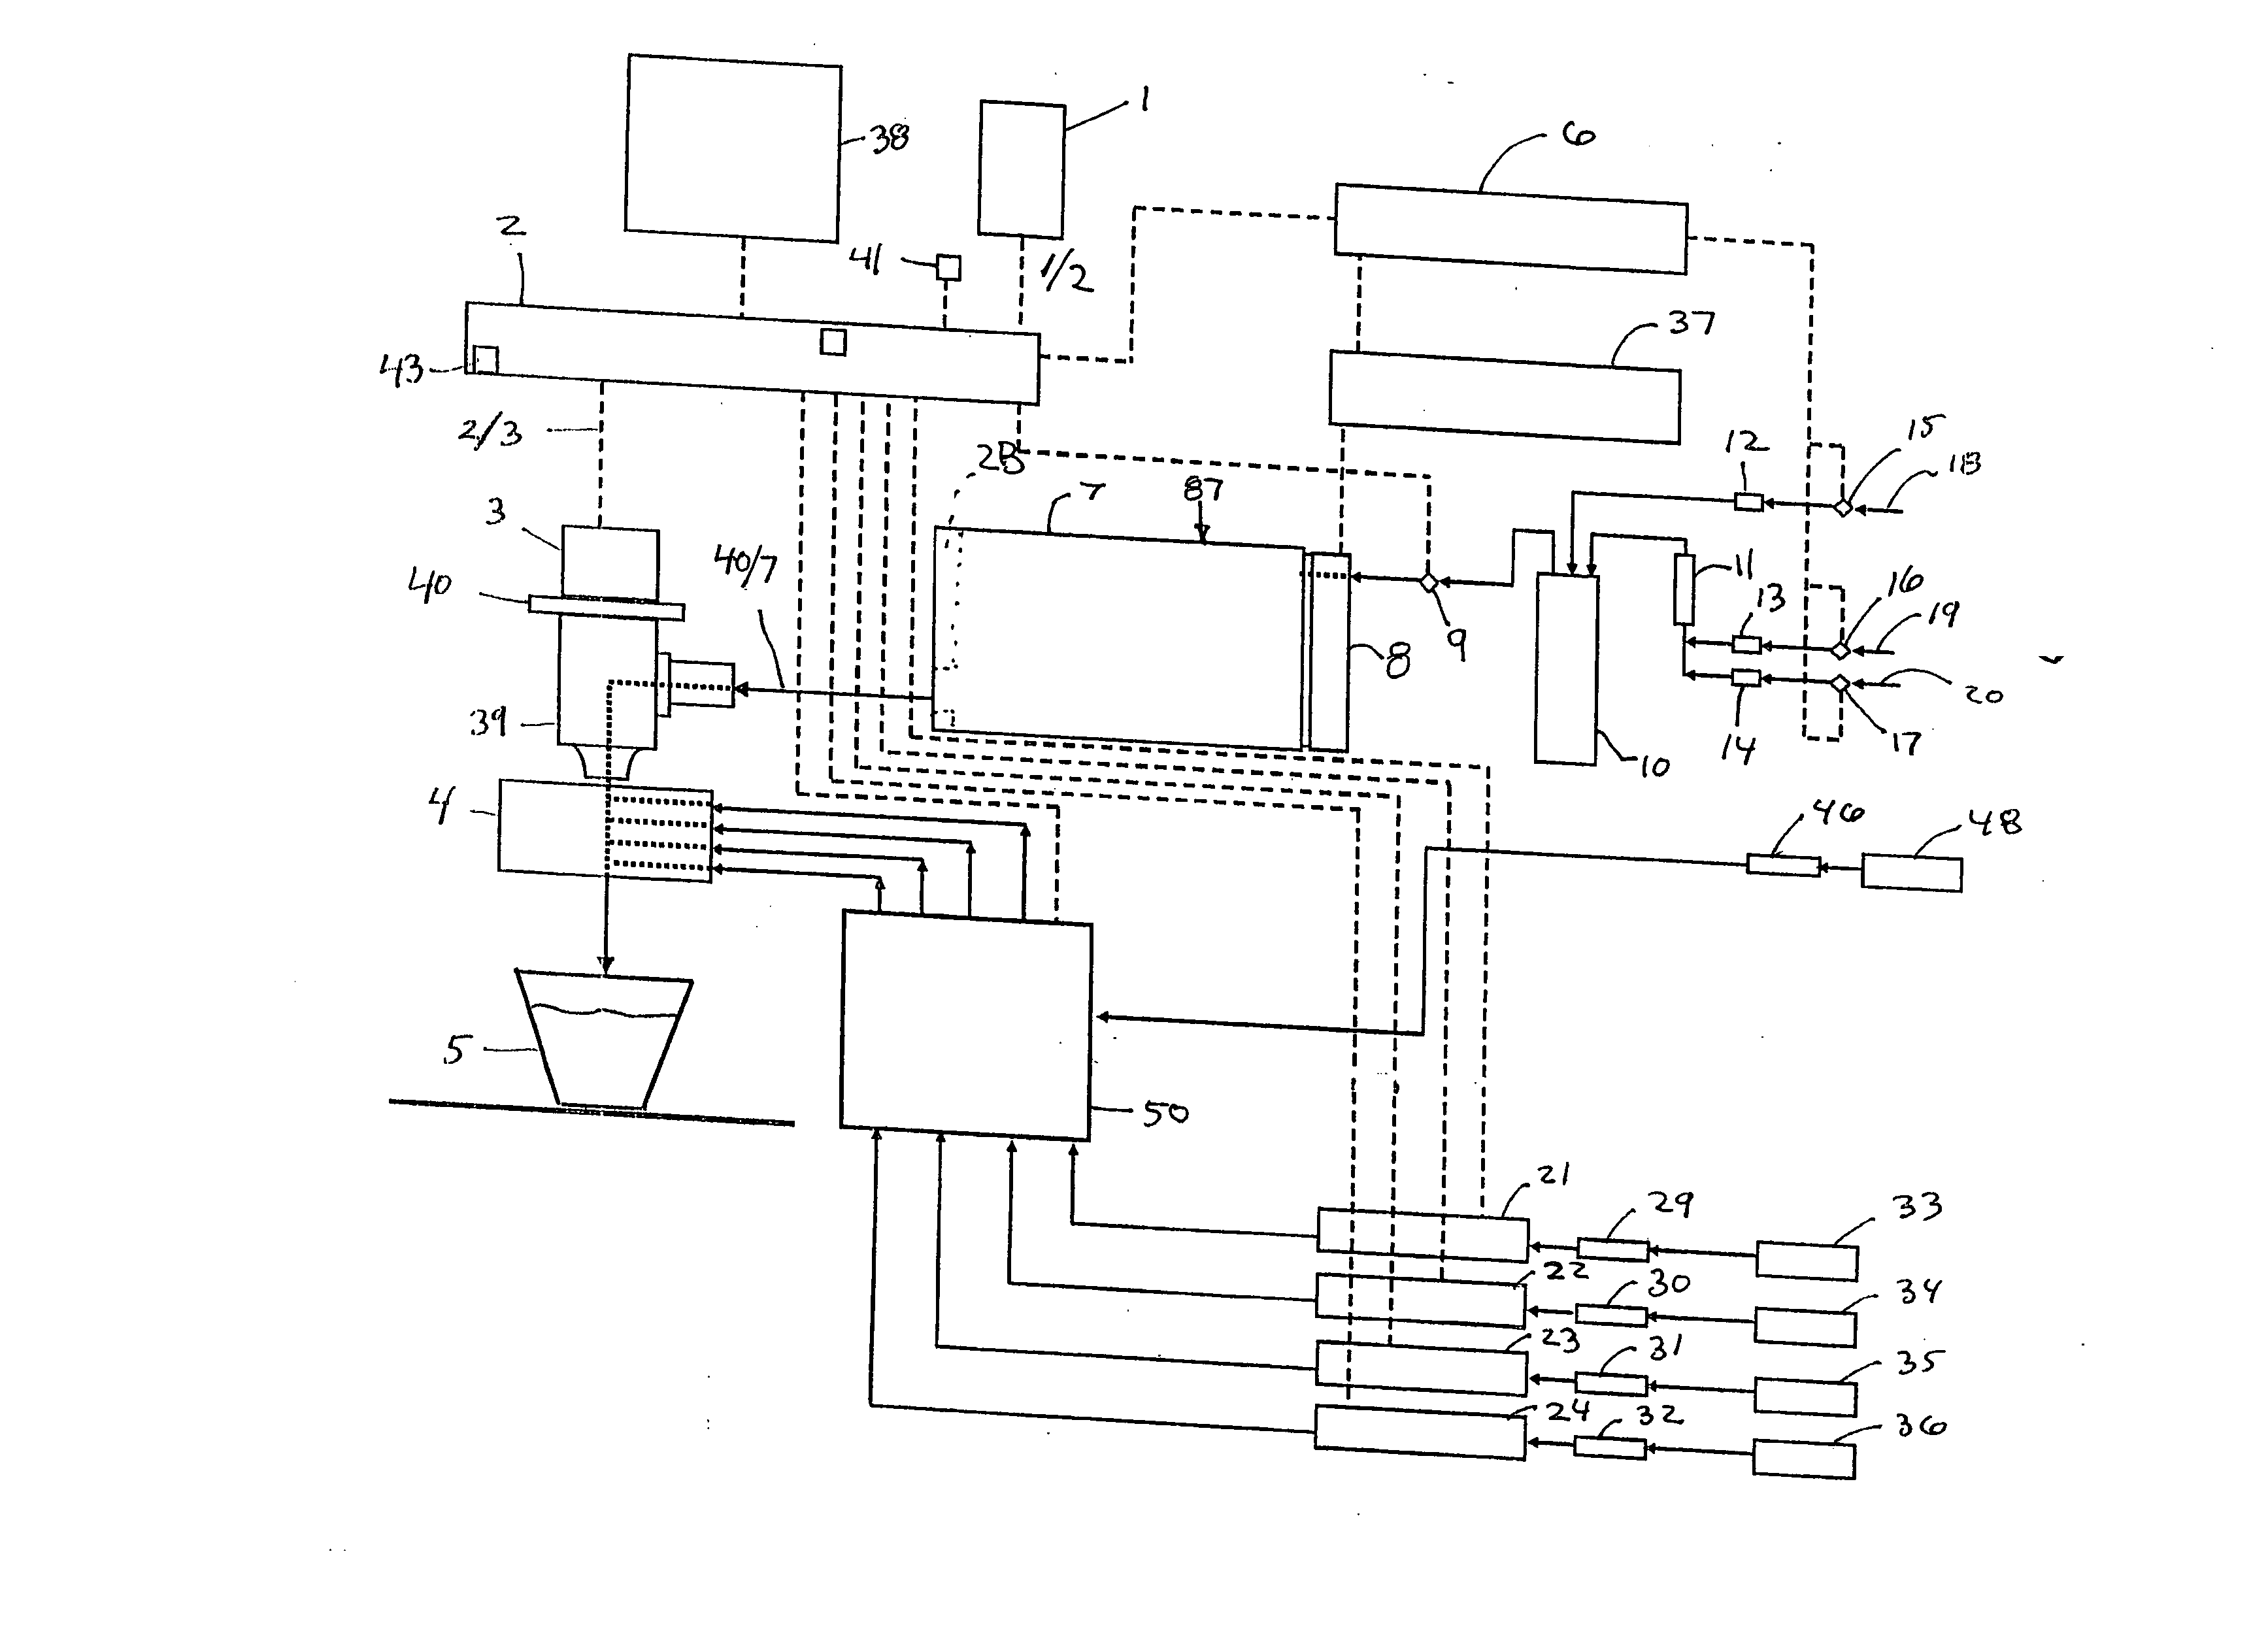 Frozen carbonated modulating dispensing valve and/or flavor injection